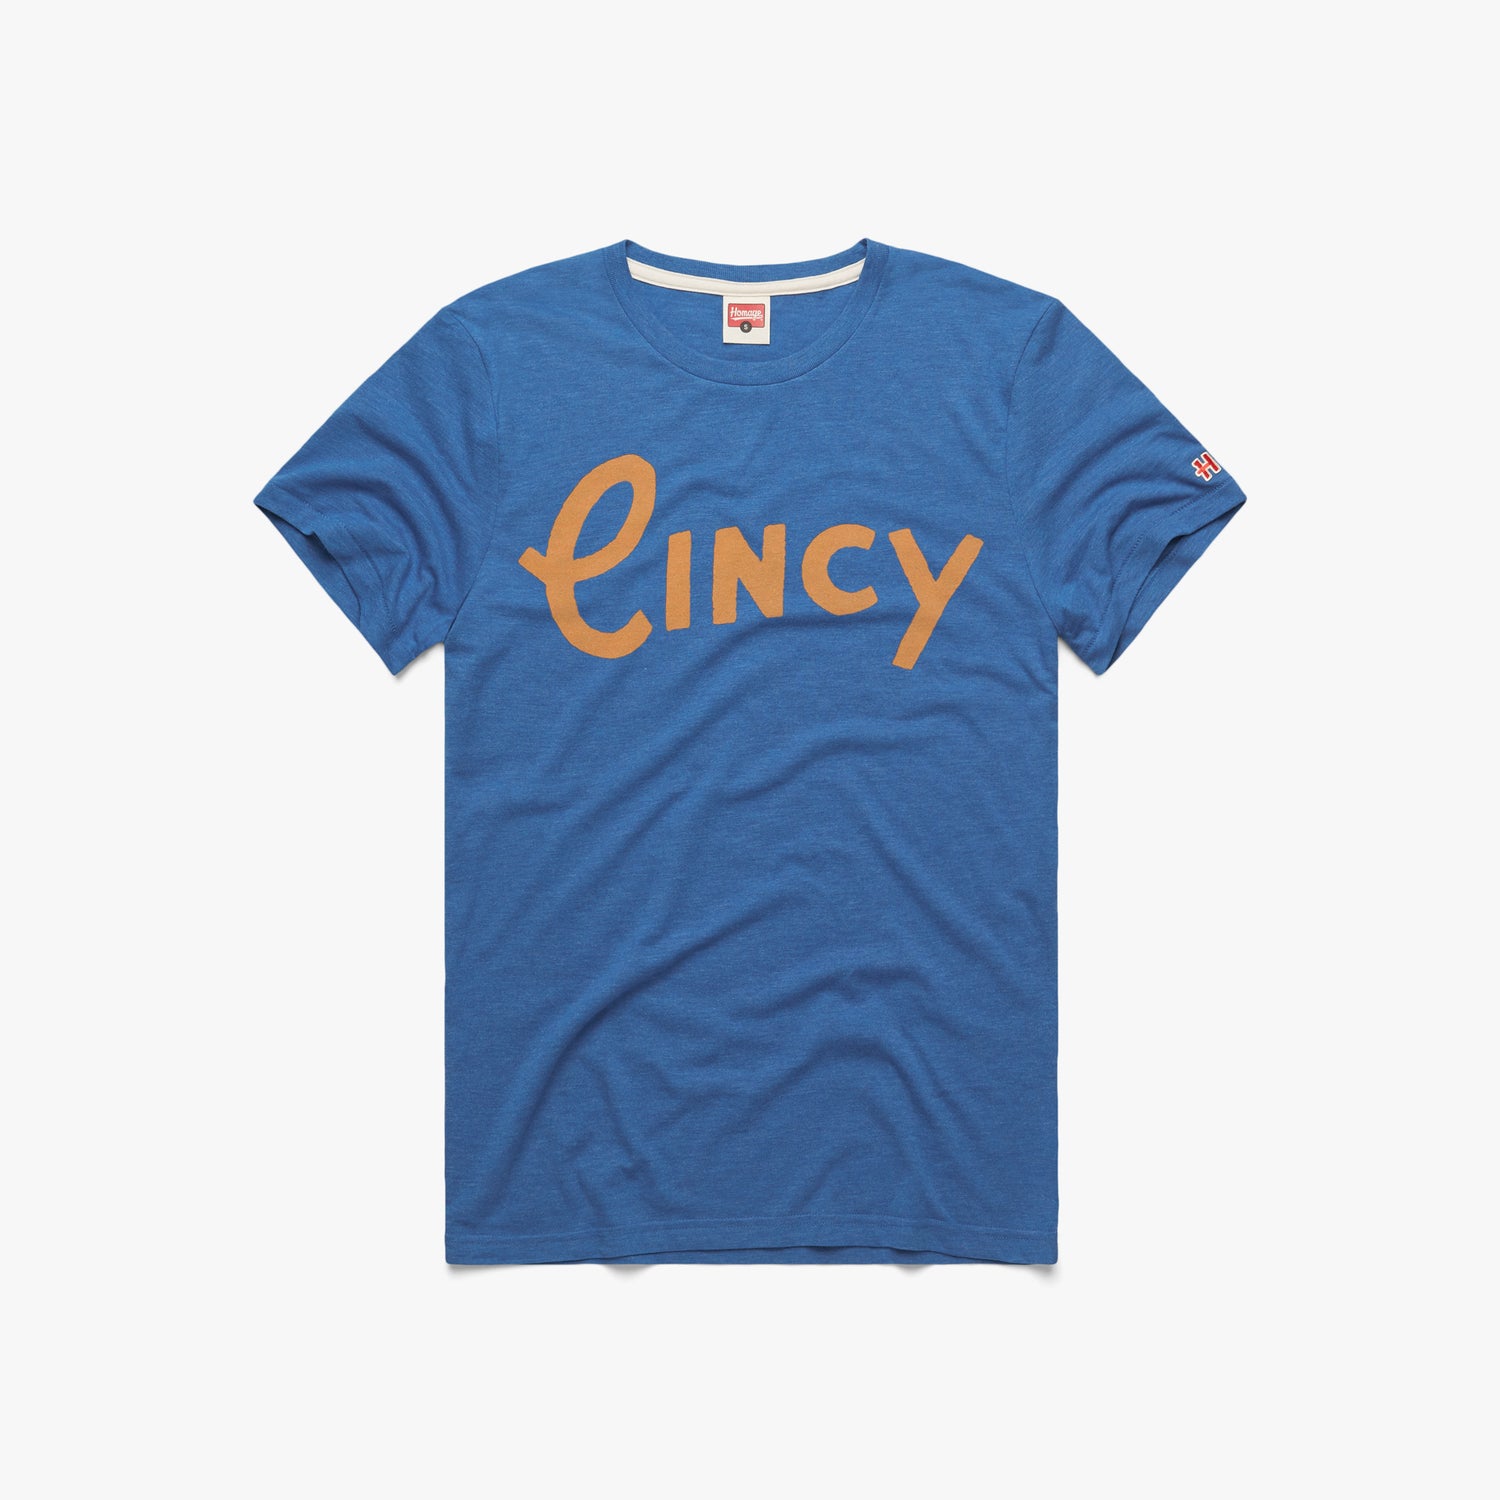 Cincy T-Shirt from Homage. | Royal Blue | Vintage Apparel from Homage.